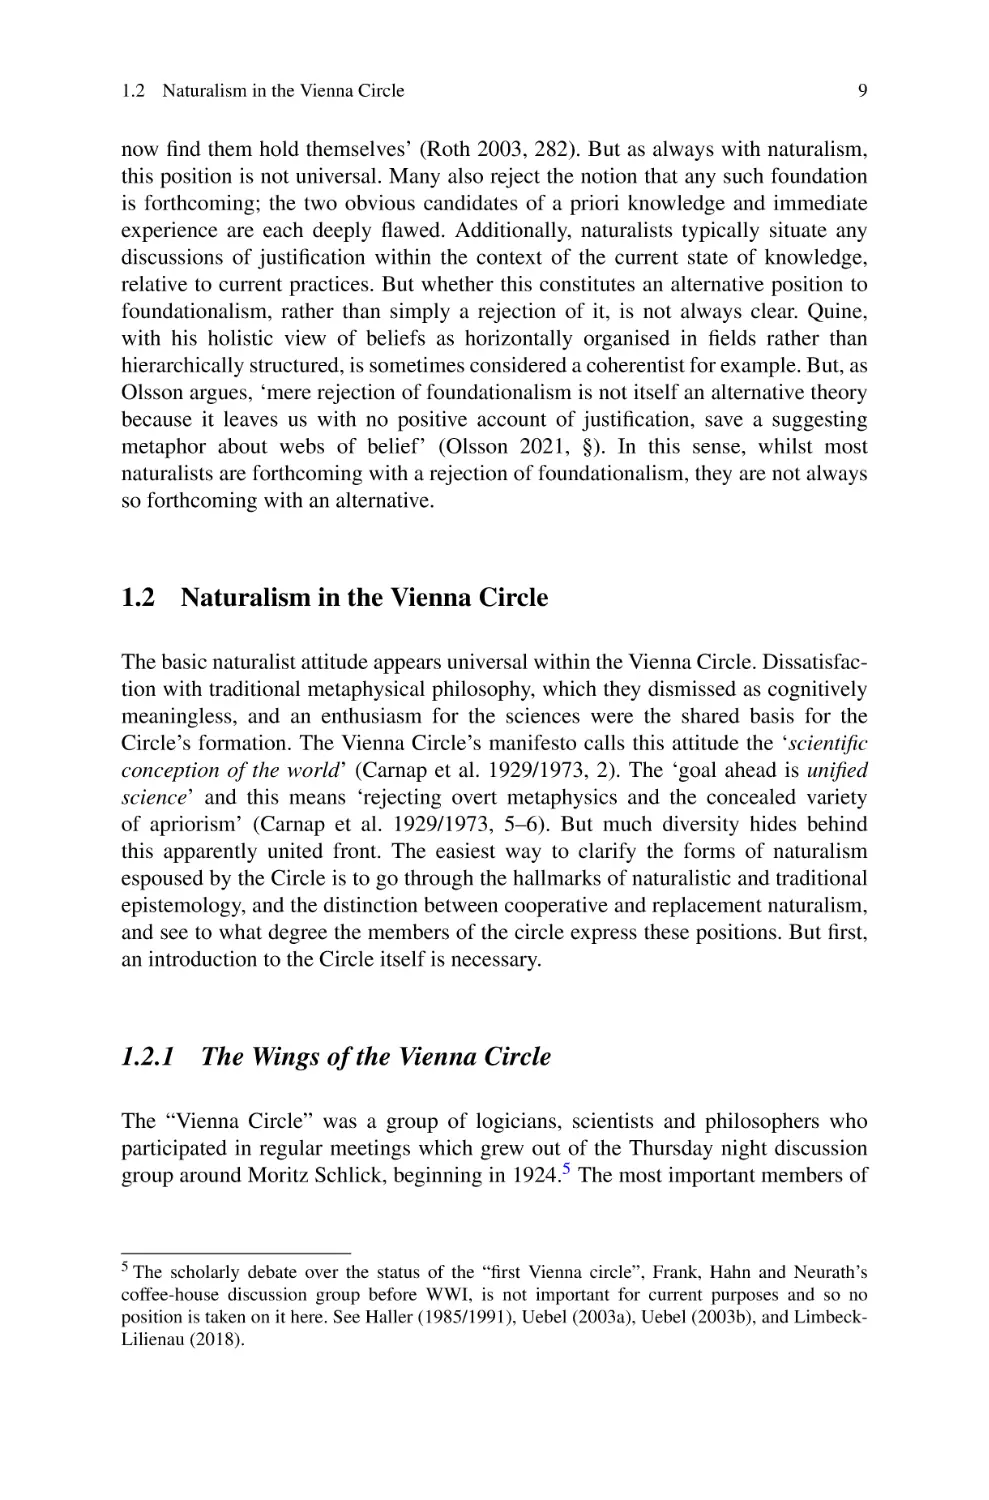 1.2 Naturalism in the Vienna Circle
1.2.1 The Wings of the Vienna Circle